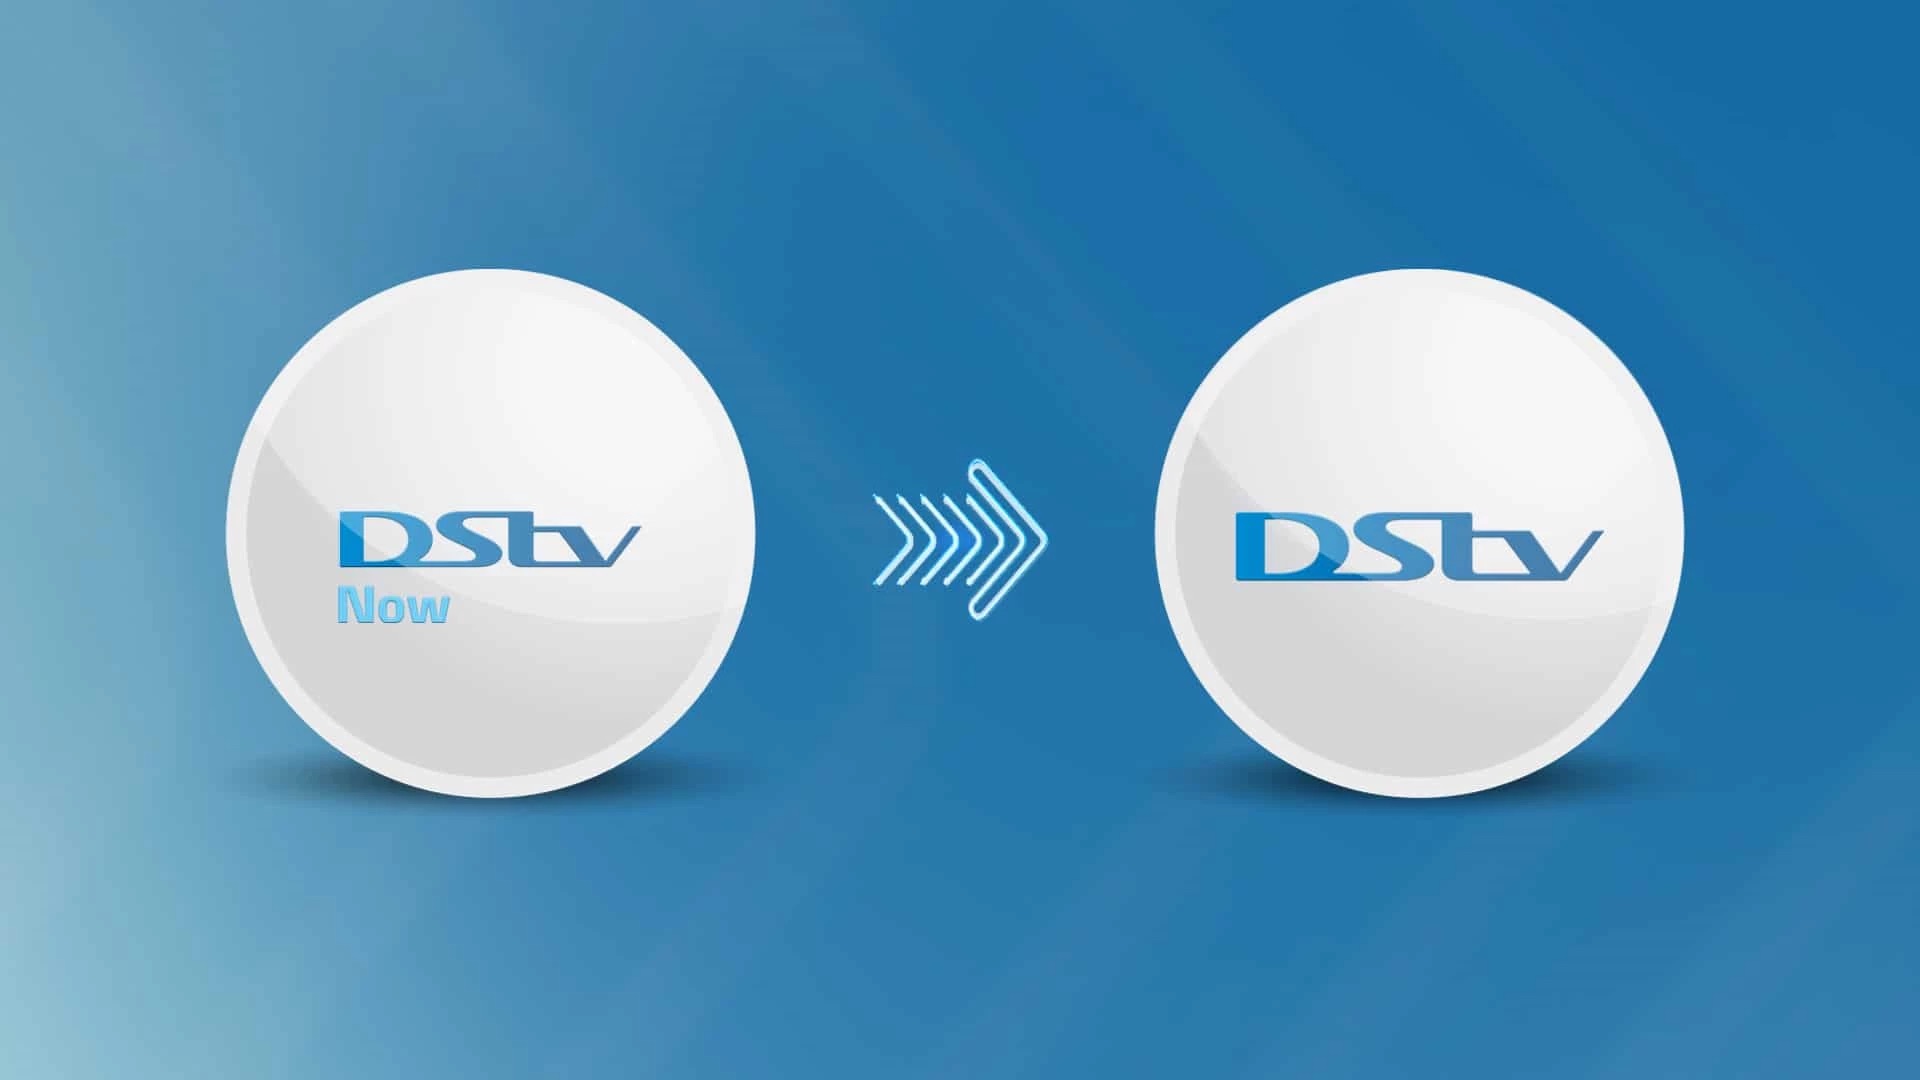 DSTv App Streaming now limited to one device at a time, across Africa